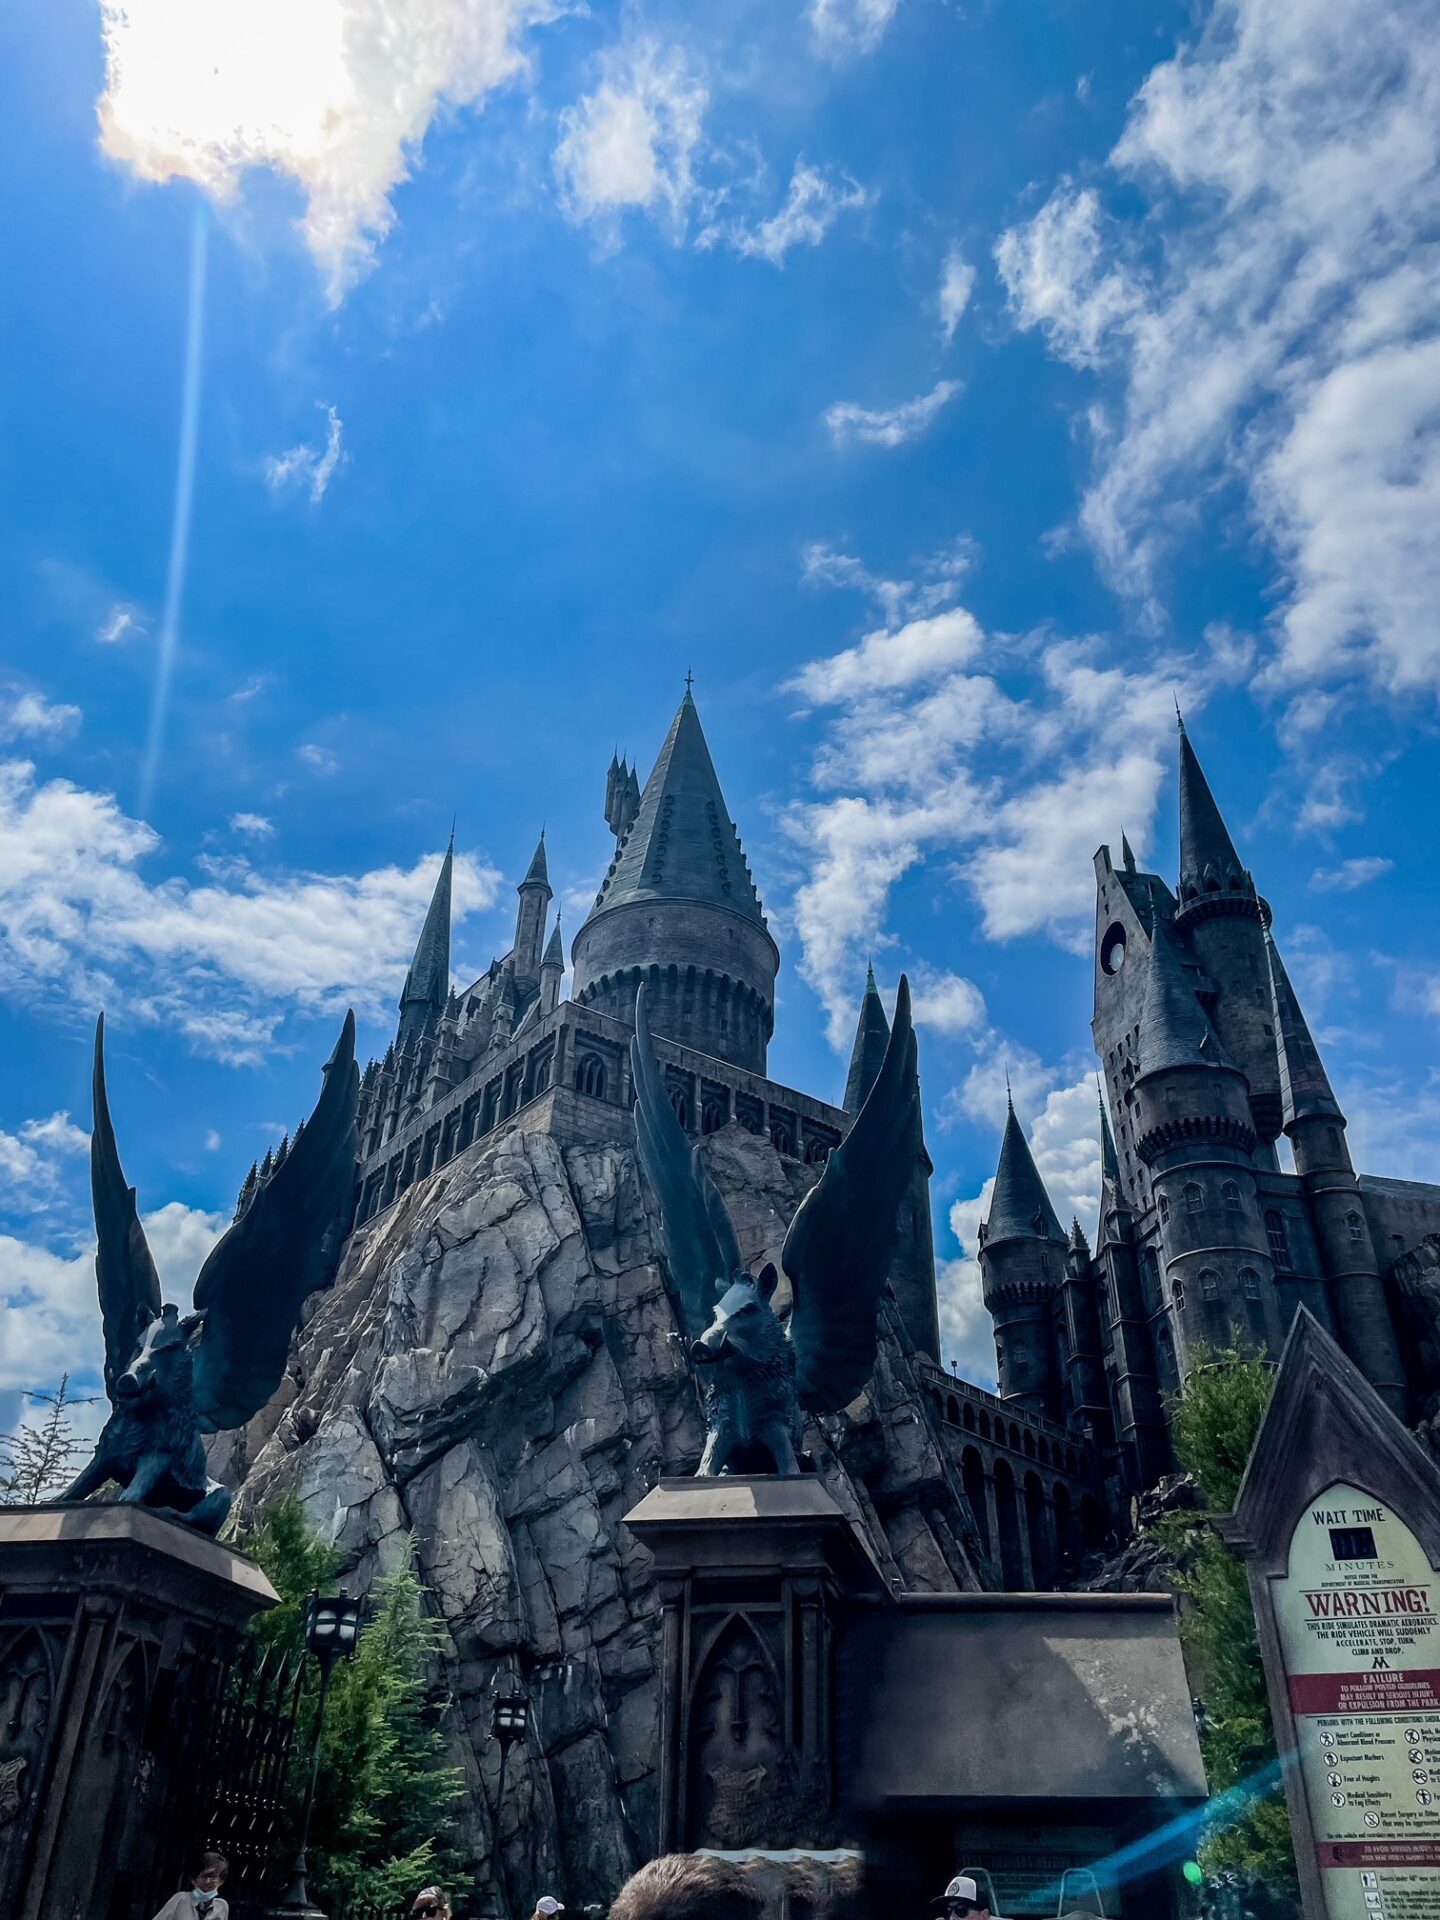 Our Anniversary Trip to Universal Orlando Resort - with things to do at Universal Studios Orlando when it rains, must-see spots at Harry Potter World, + MORE!